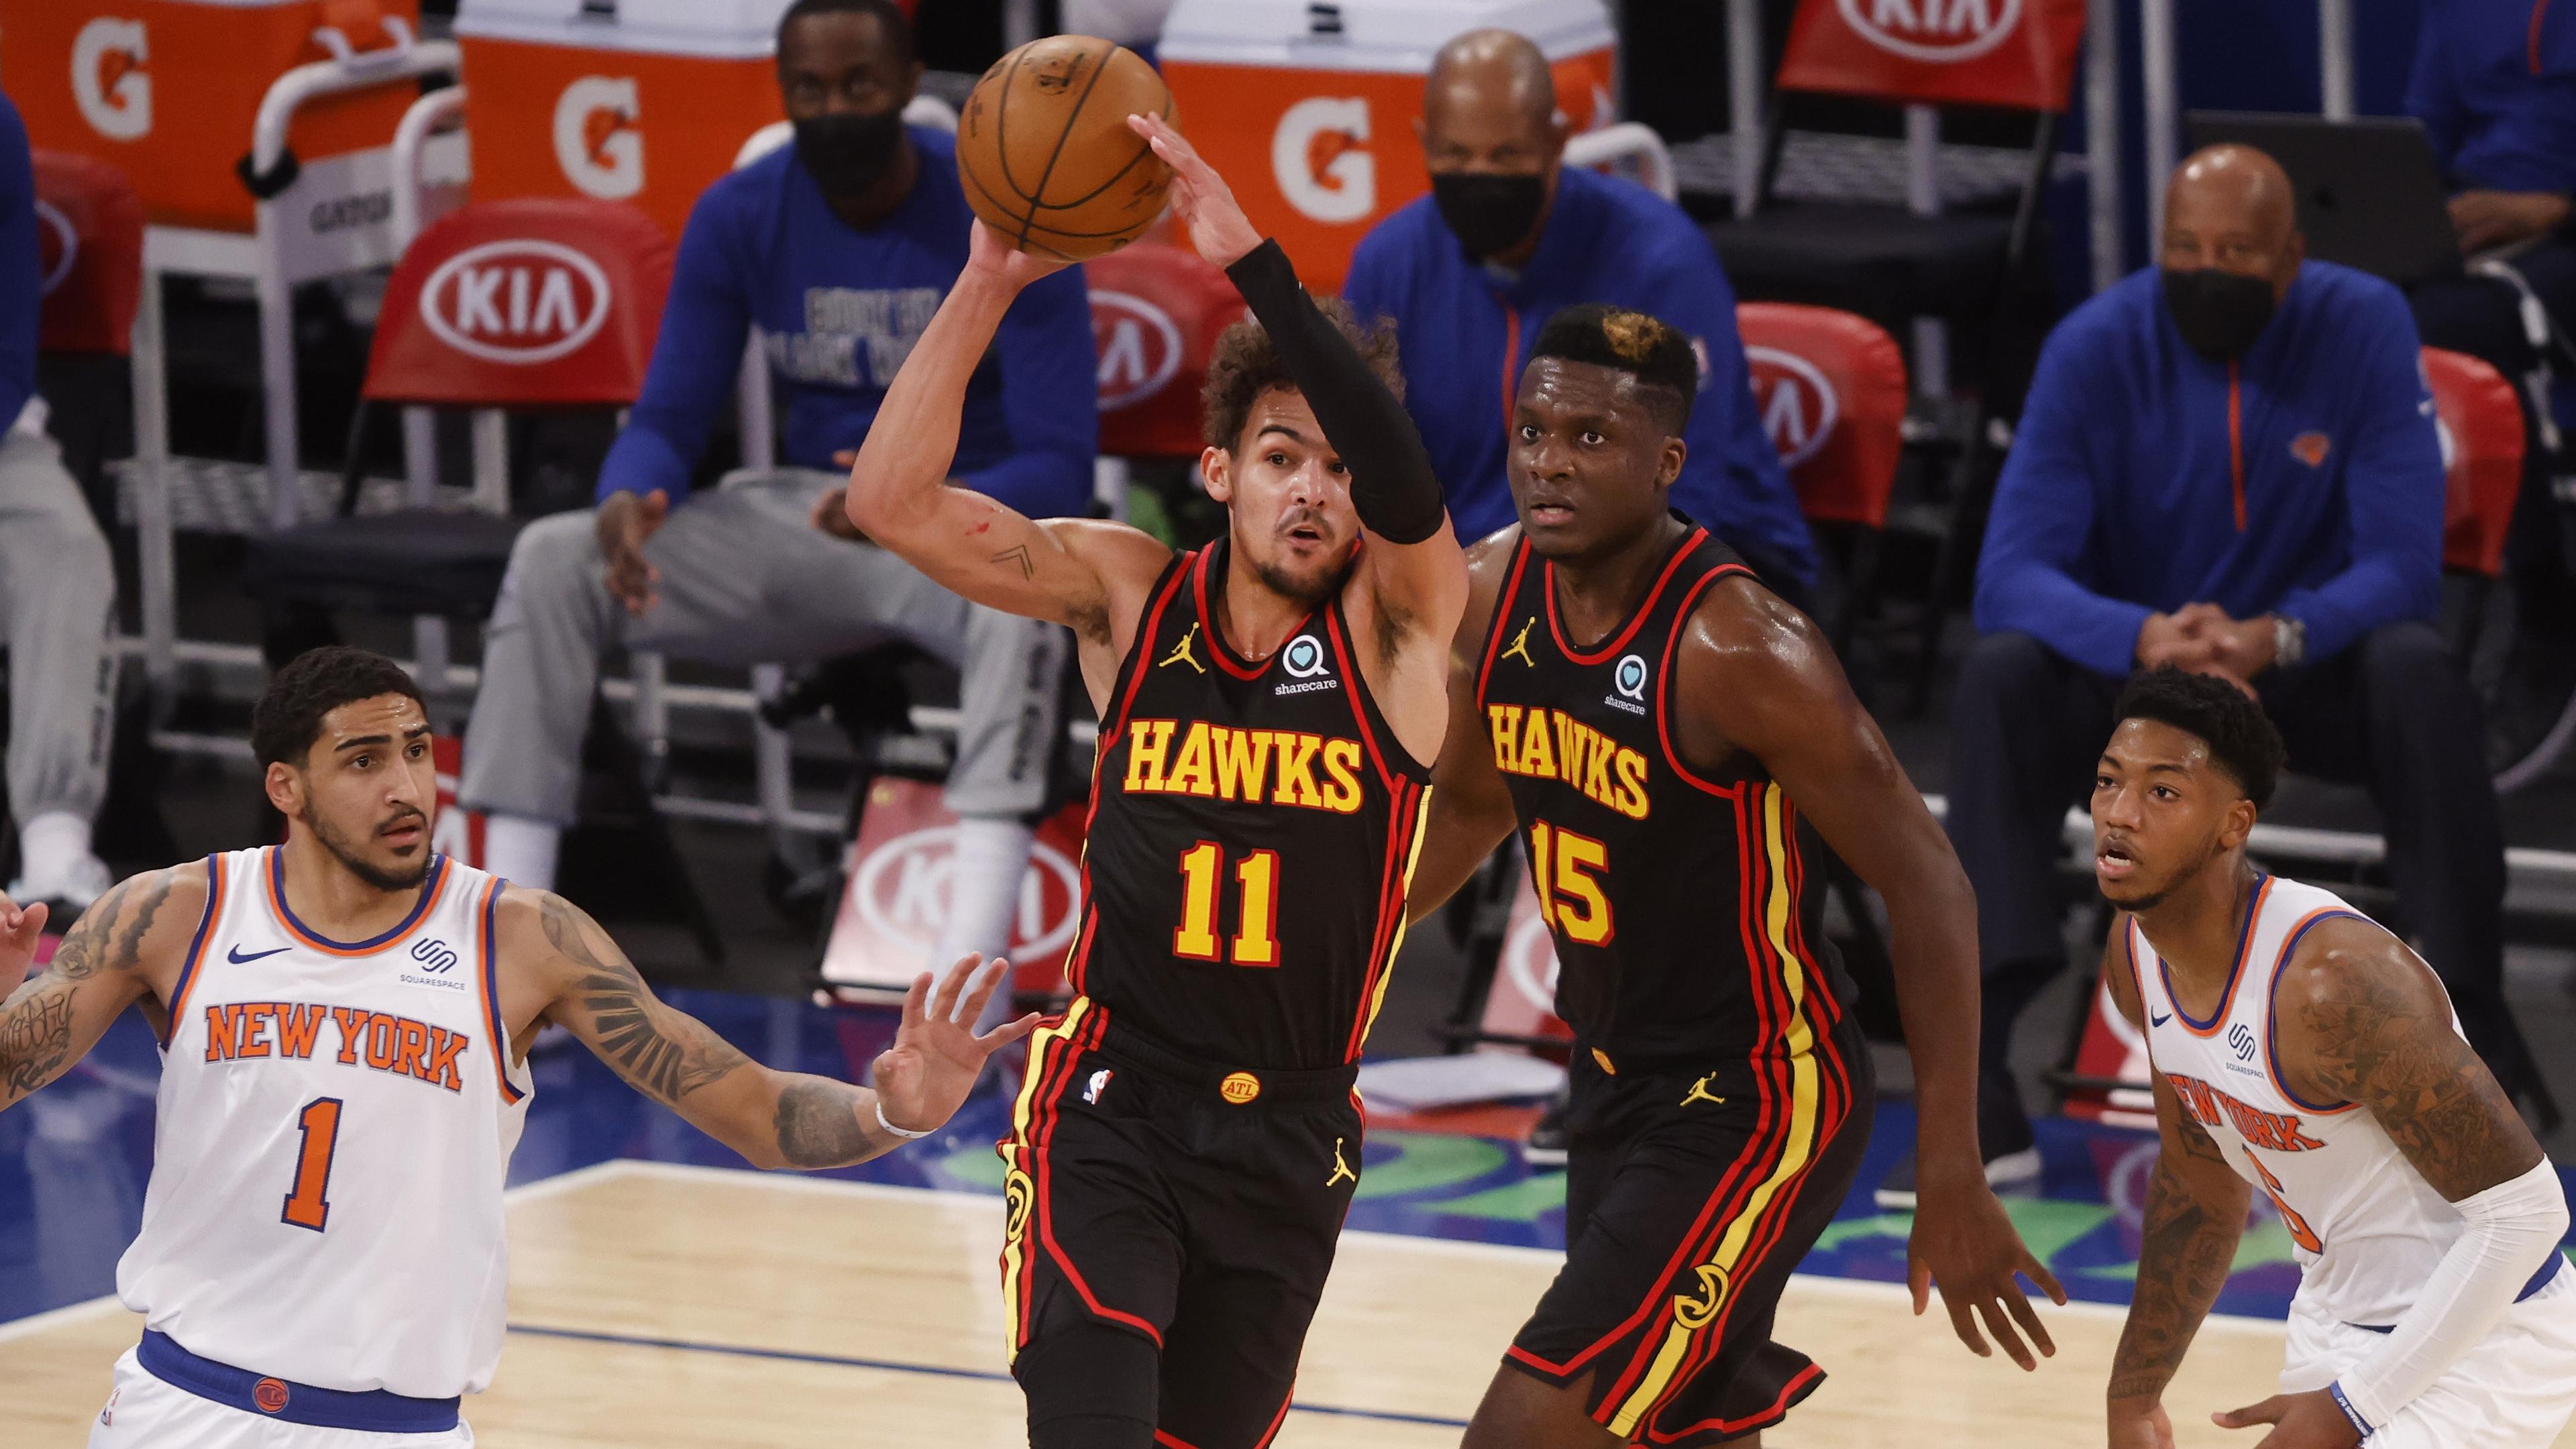 Feb 15, 2021; New York, New York, USA; Atlanta Hawks' Trae Young (11) passes away from New York Knicks' Obi Toppin (1) and Elfrid Payton (6) during the second quarter at Madison Square Garden. Mandatory Credit: Jason DeCrow/Pool Photo-USA TODAY Sports / © Pool Photo-USA TODAY Sports